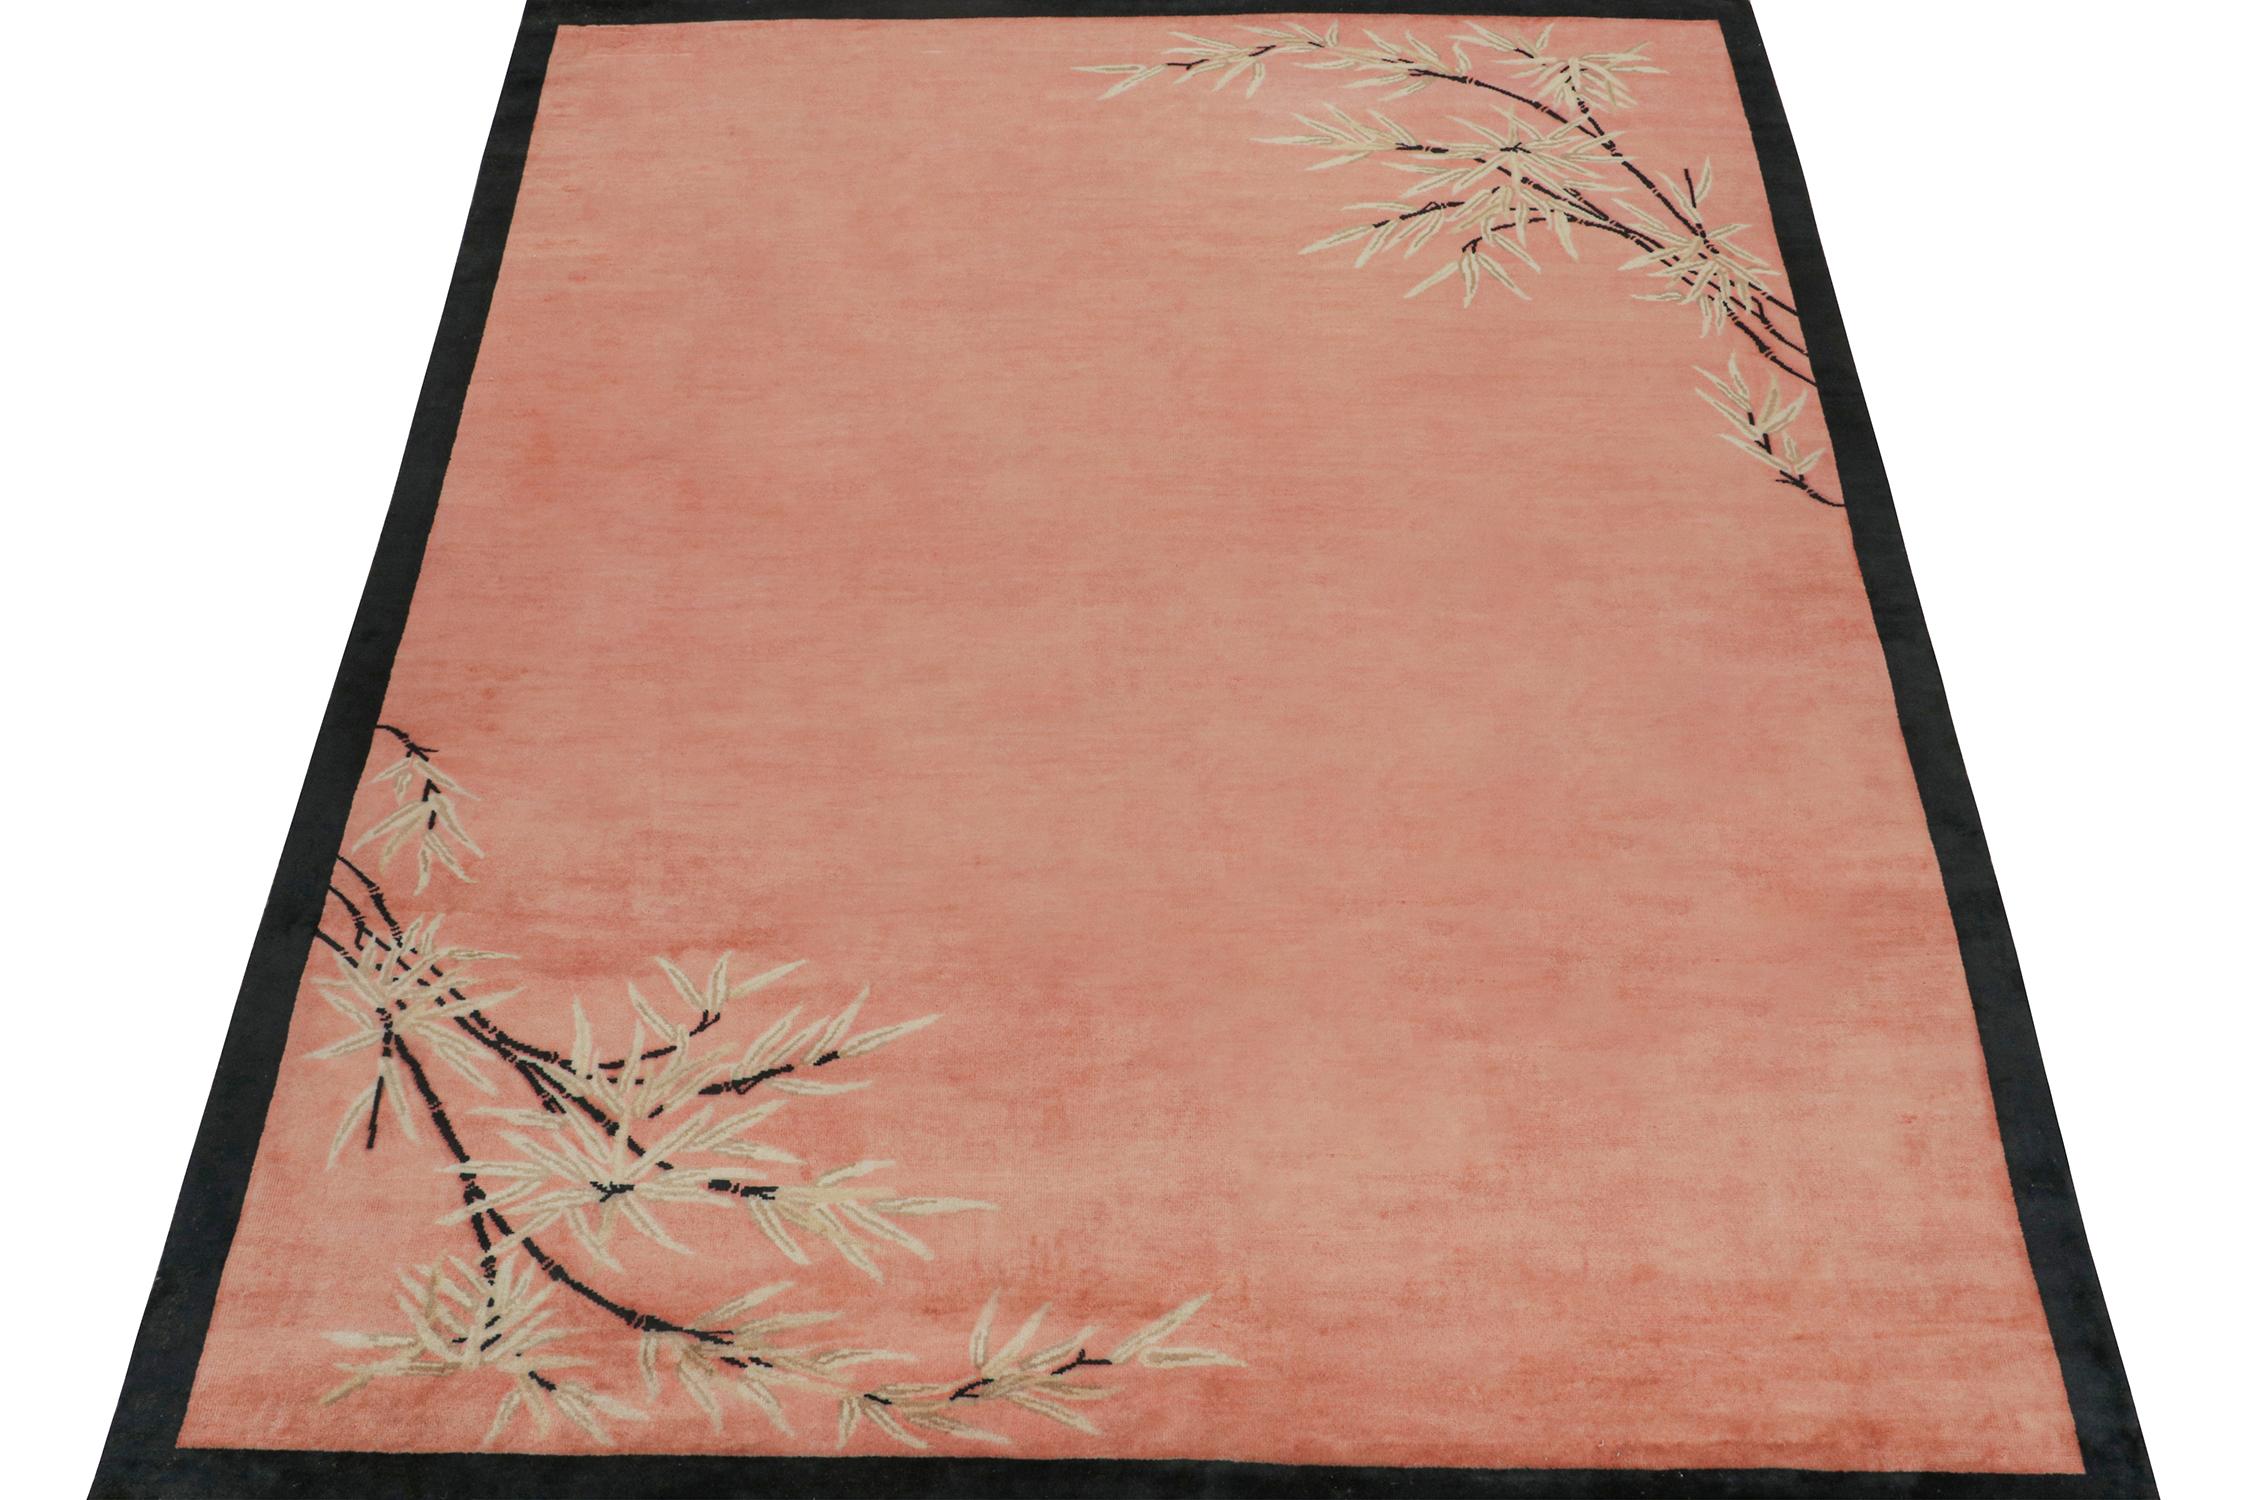 This 8x10 ode to Chinese Art Deco rugs is the next addition to Rug & Kilim's inspired new 
Deco Collection. 

Further On the Design:

The piece enjoys an emphasis on a warm pink background with finely detailed floral patterns within.